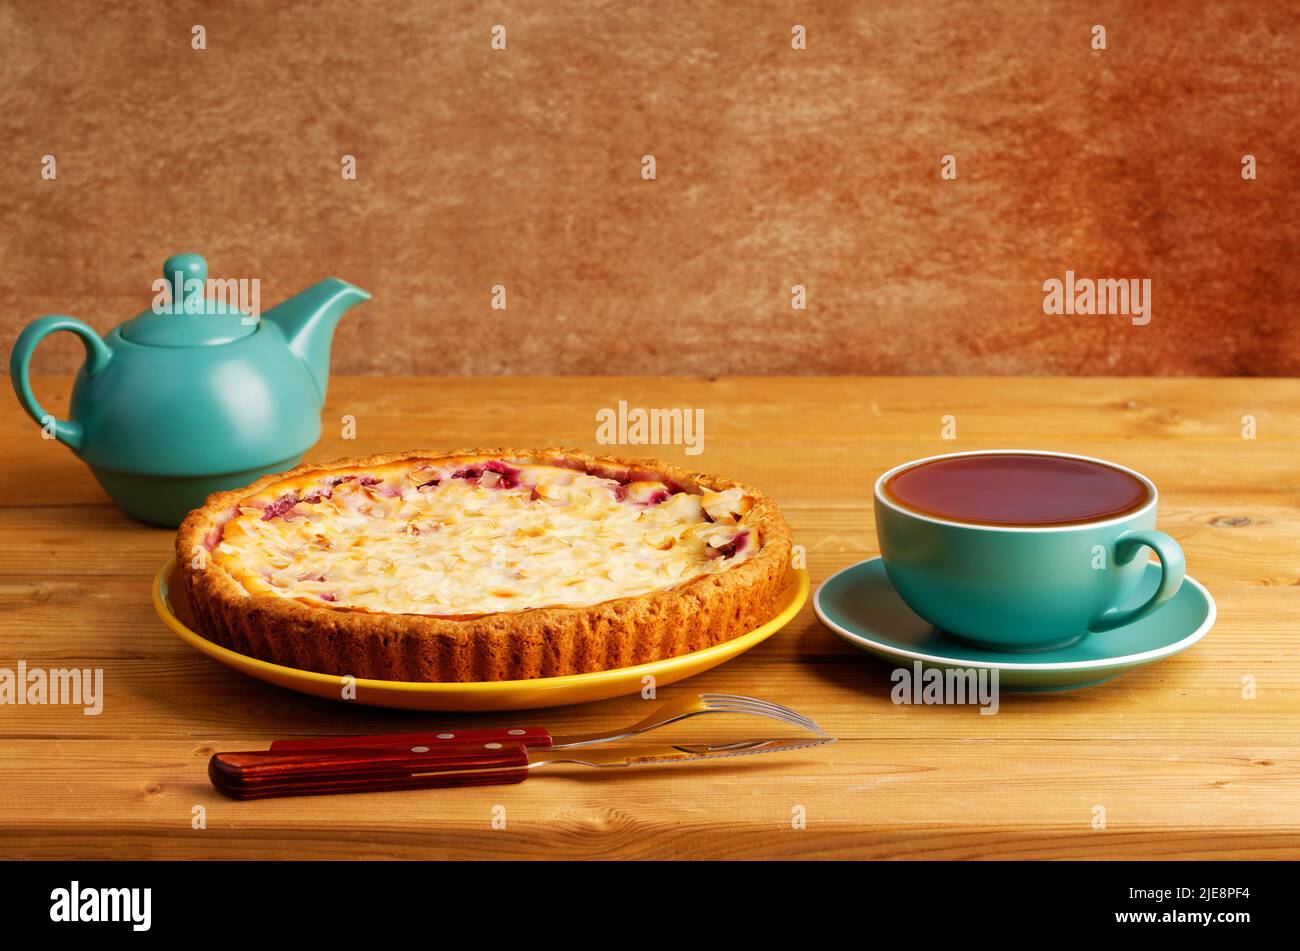 Homemade berry pie and cup of tea on wooden table. Copyspace. Stock Photo